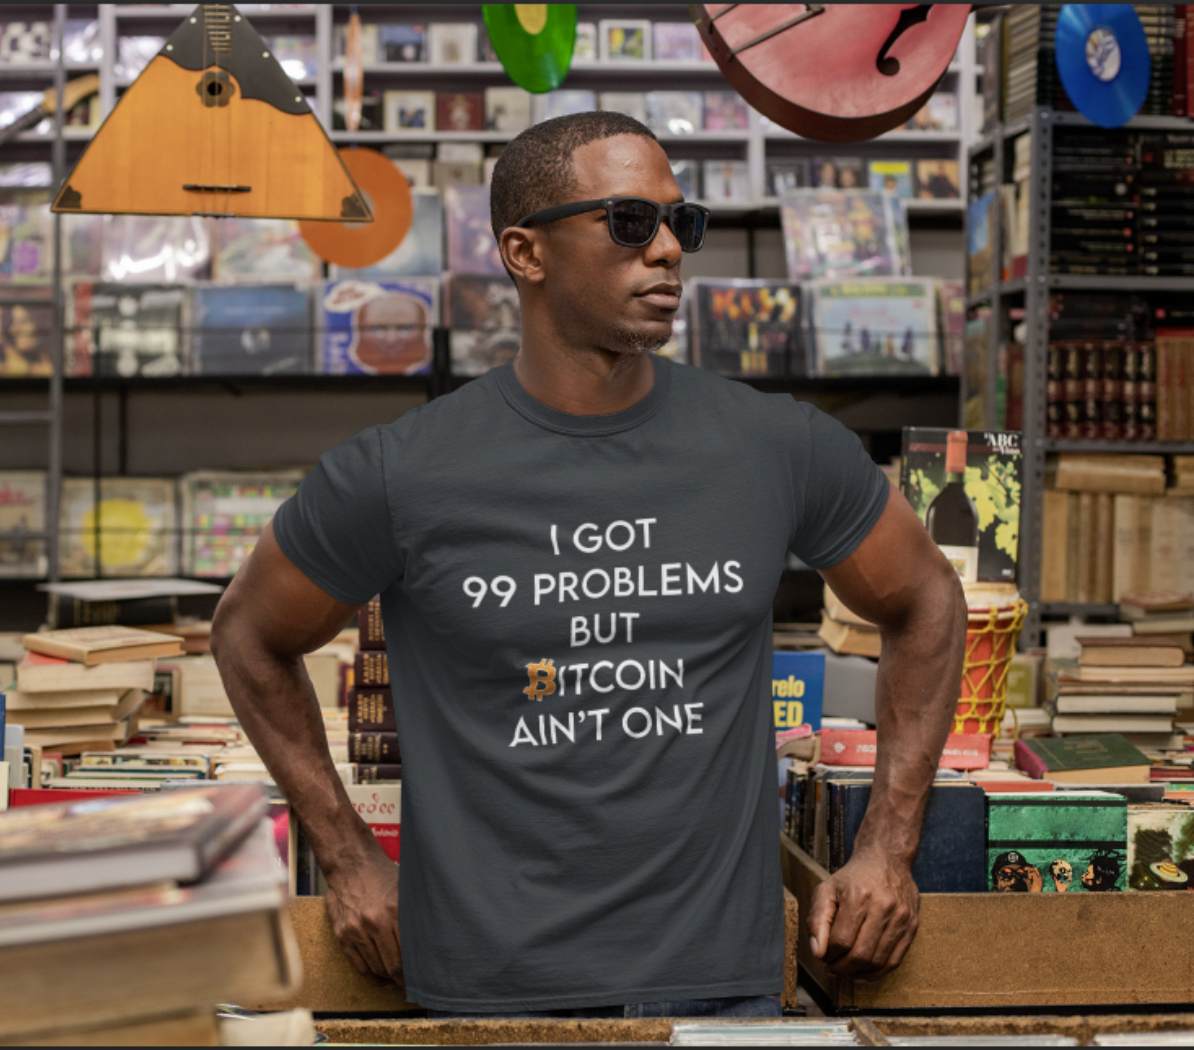 99 Problems but Bitcoin Ain't One